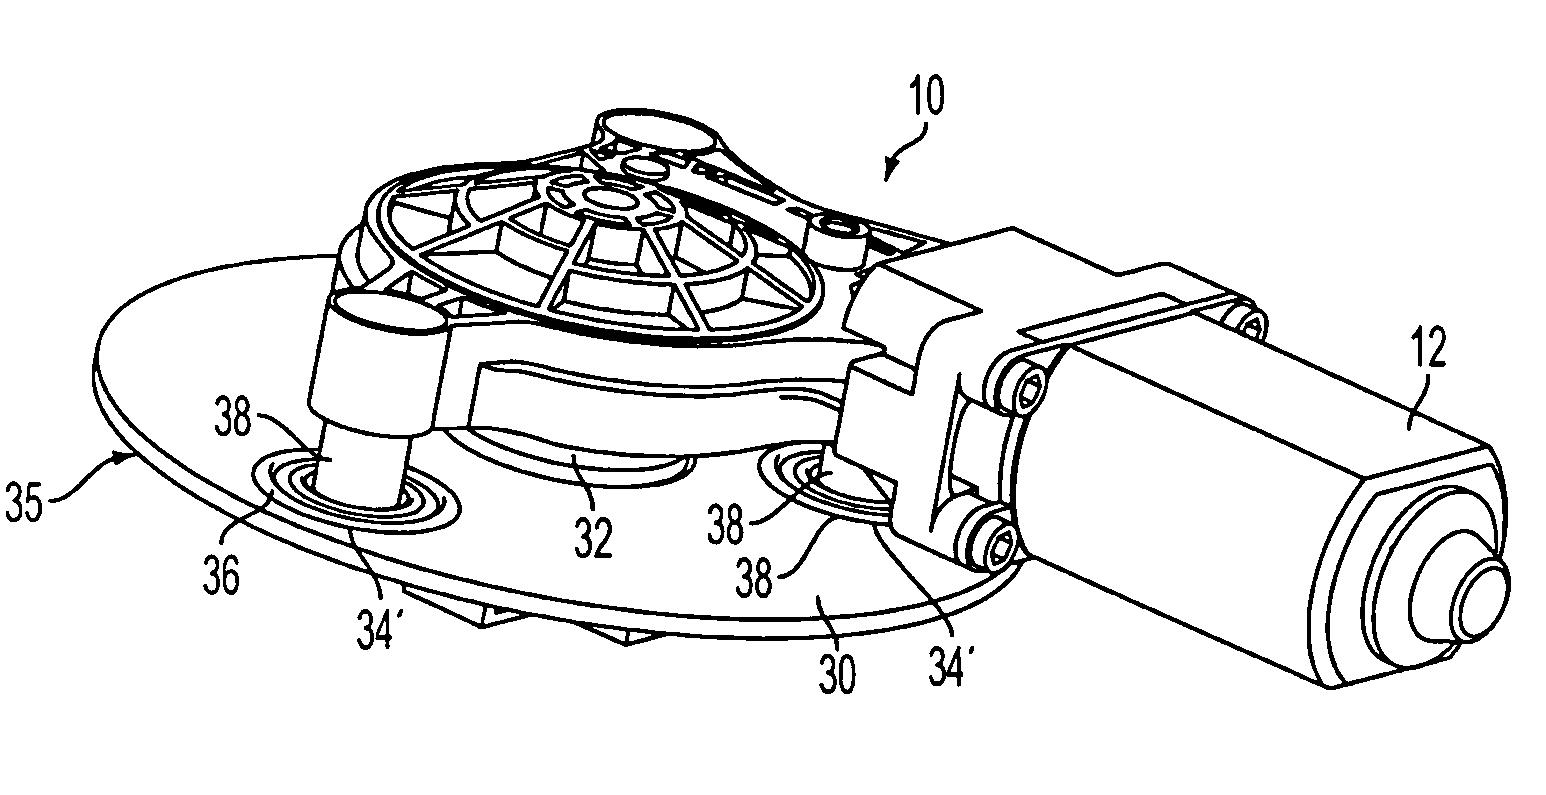 Electric motor drive system assembly with vibration dampening